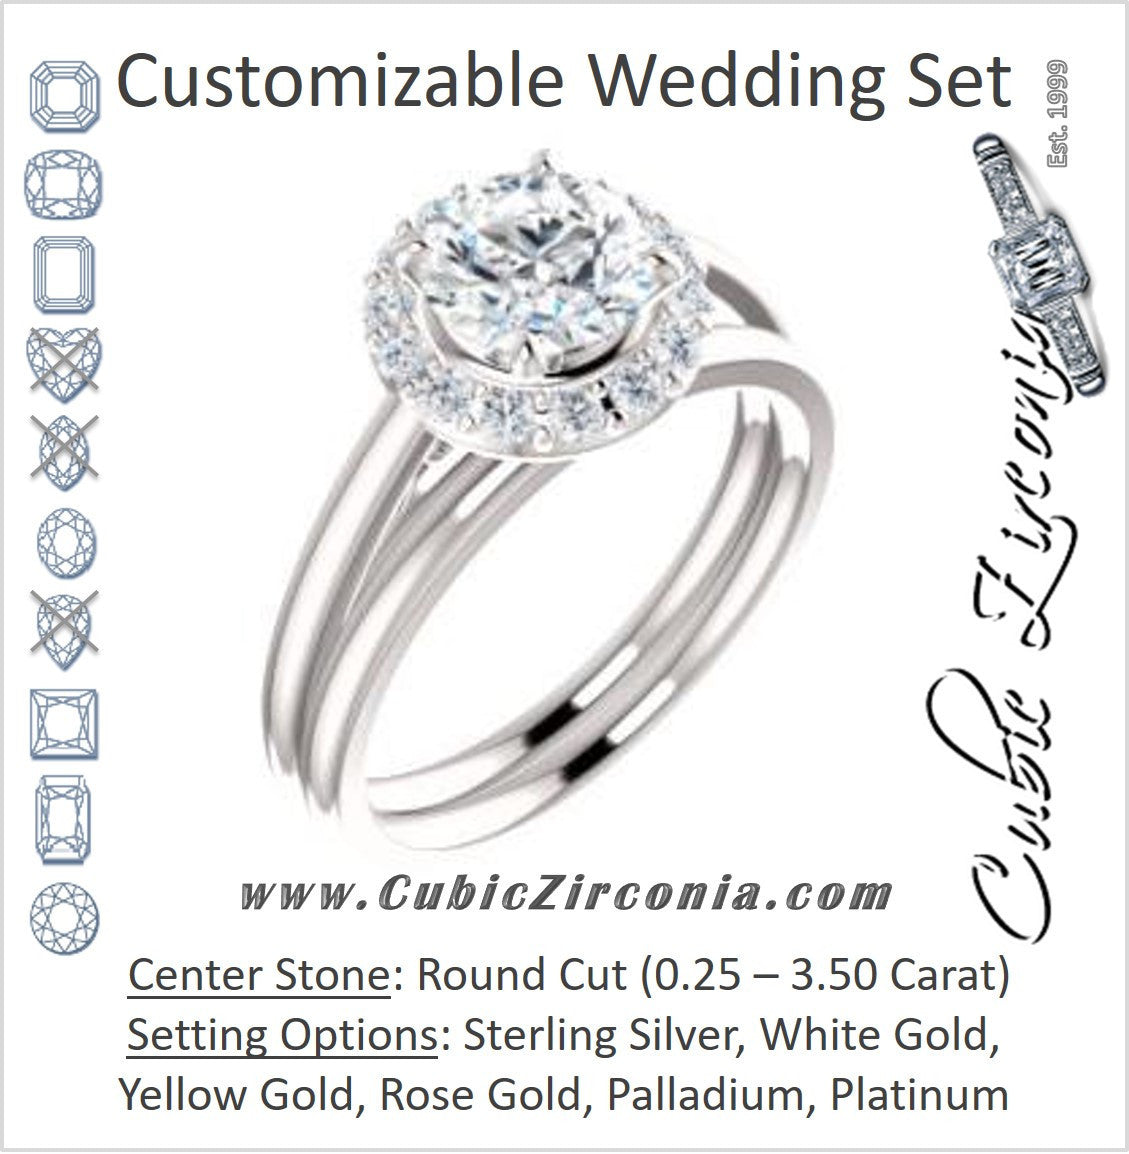 CZ Wedding Set, featuring The Tyra engagement ring (Customizable Cathedral-set Round Cut Style with Halo, Decorative Trellis and Thin Band)